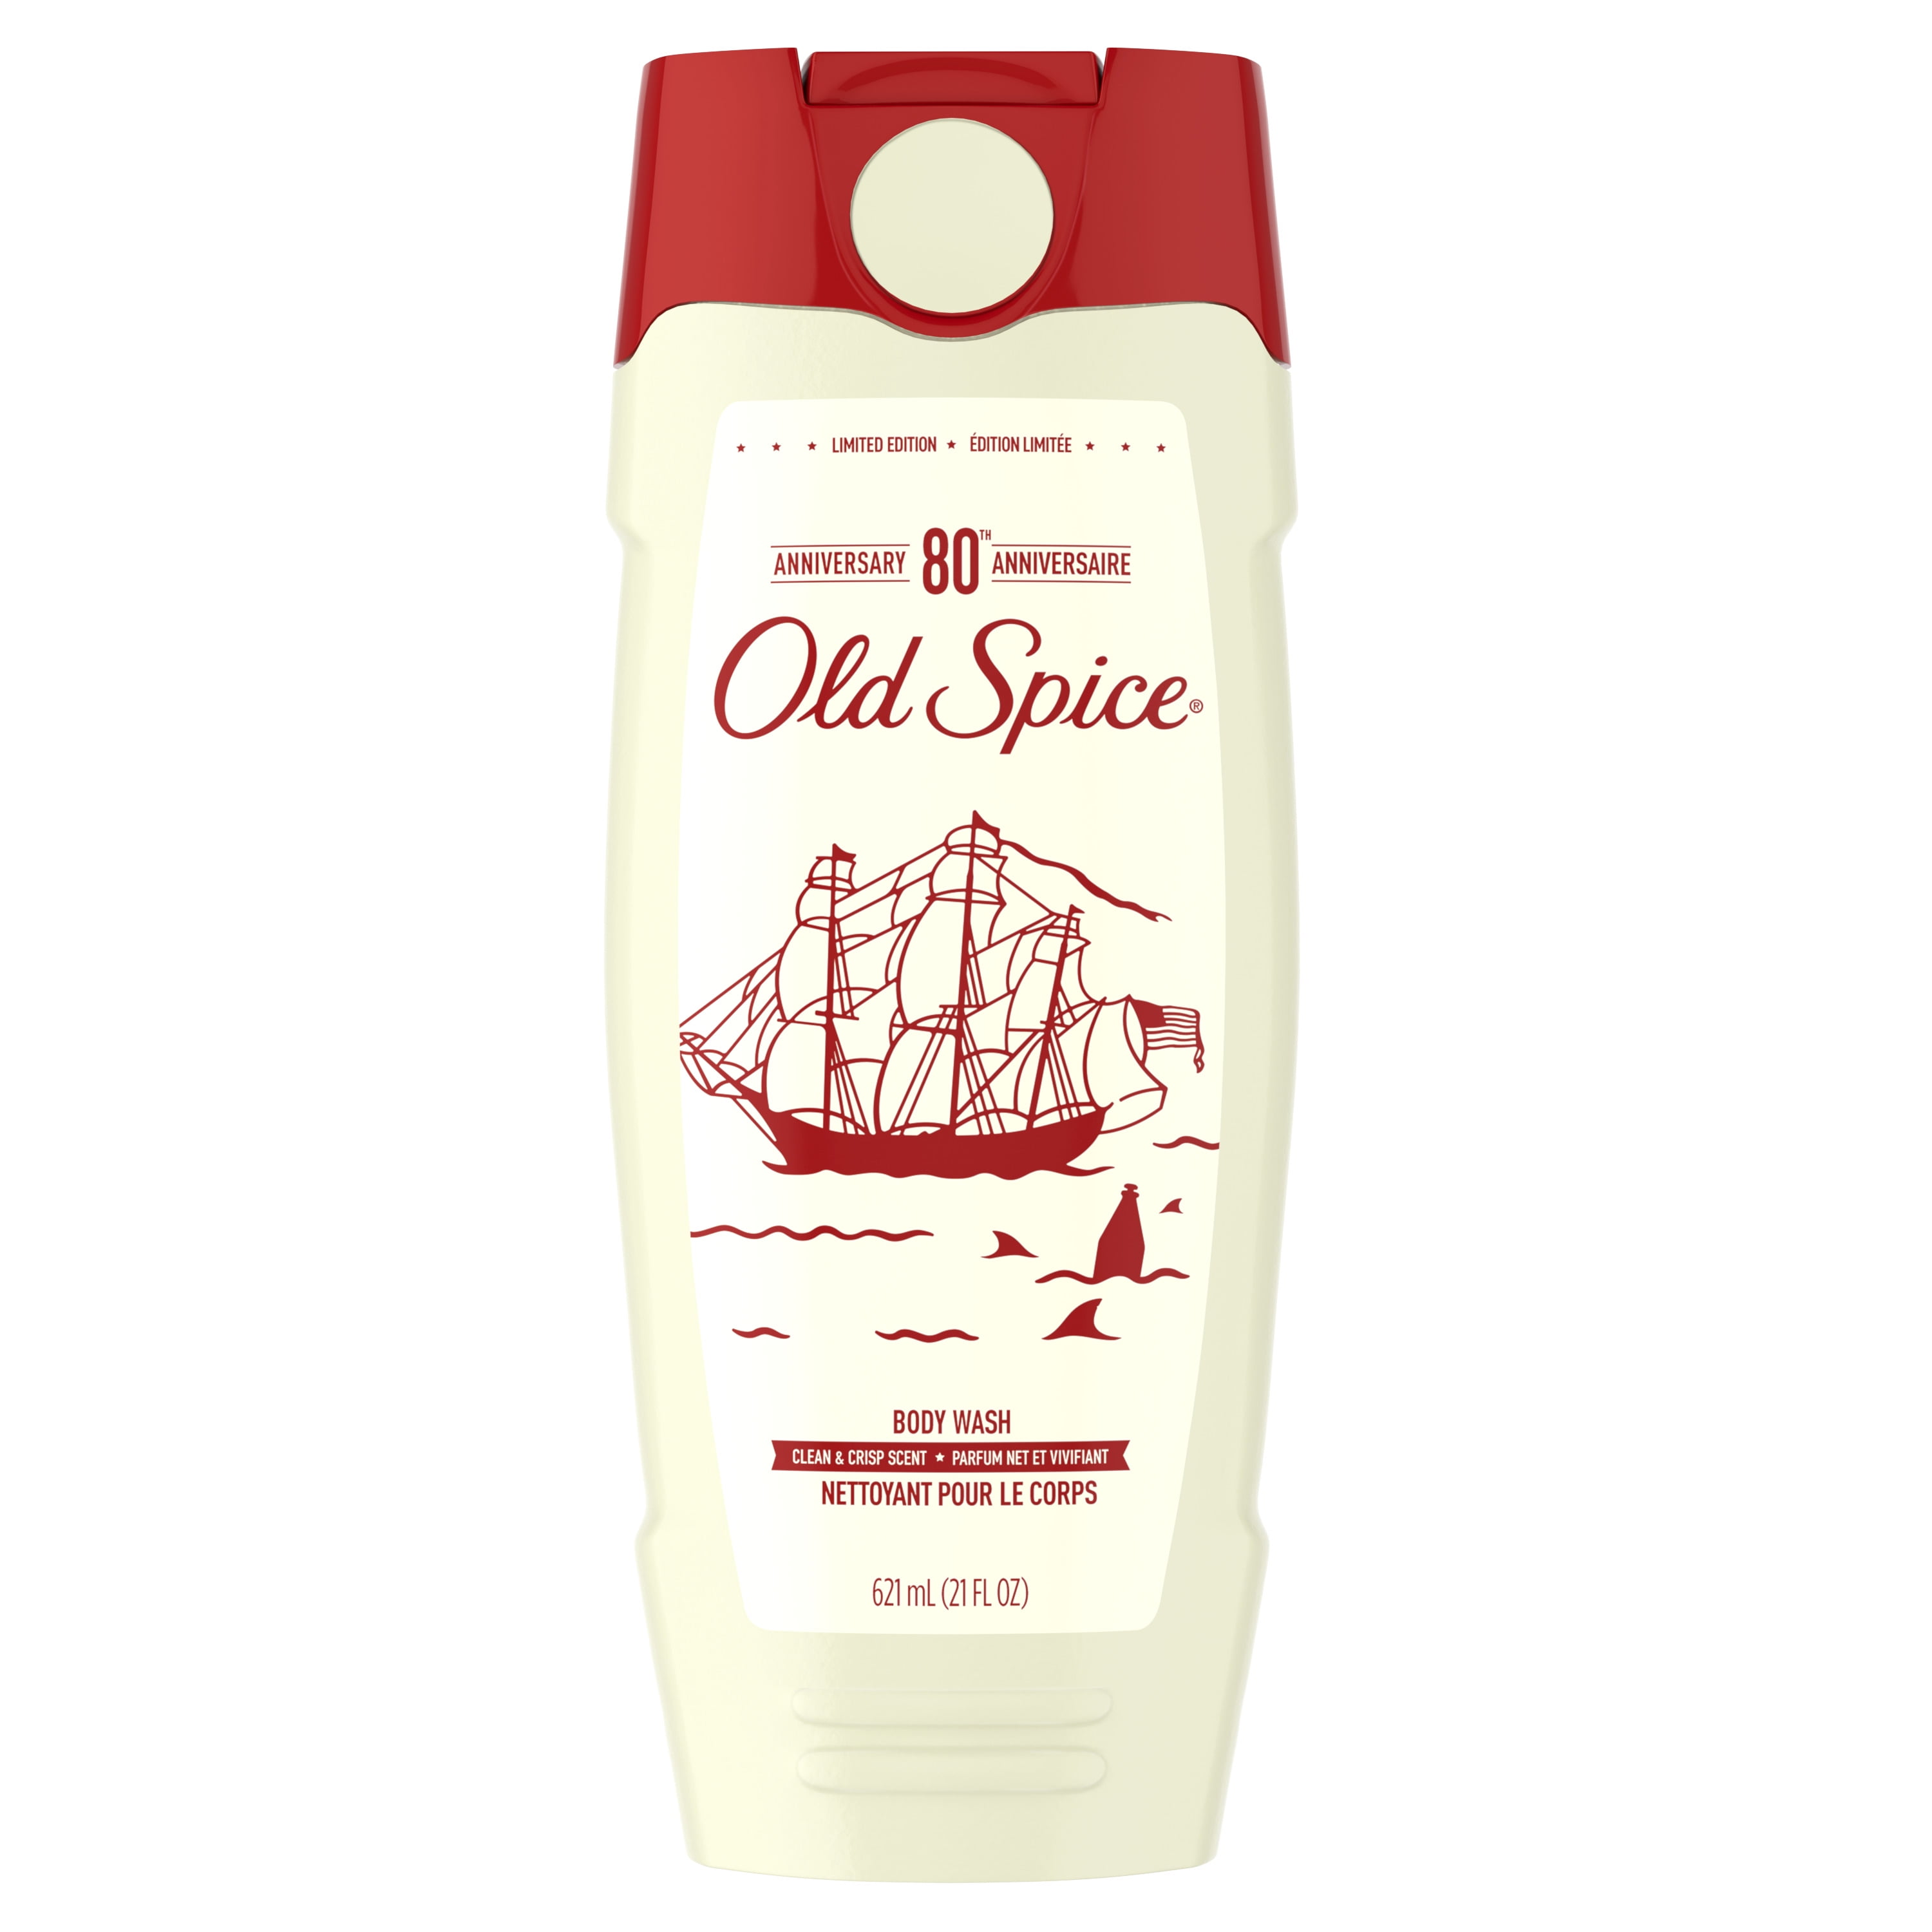 Old shower. Old Spice 80th Anniversary. Old Spice body Wash. Old Spice Bearglove 85гр.